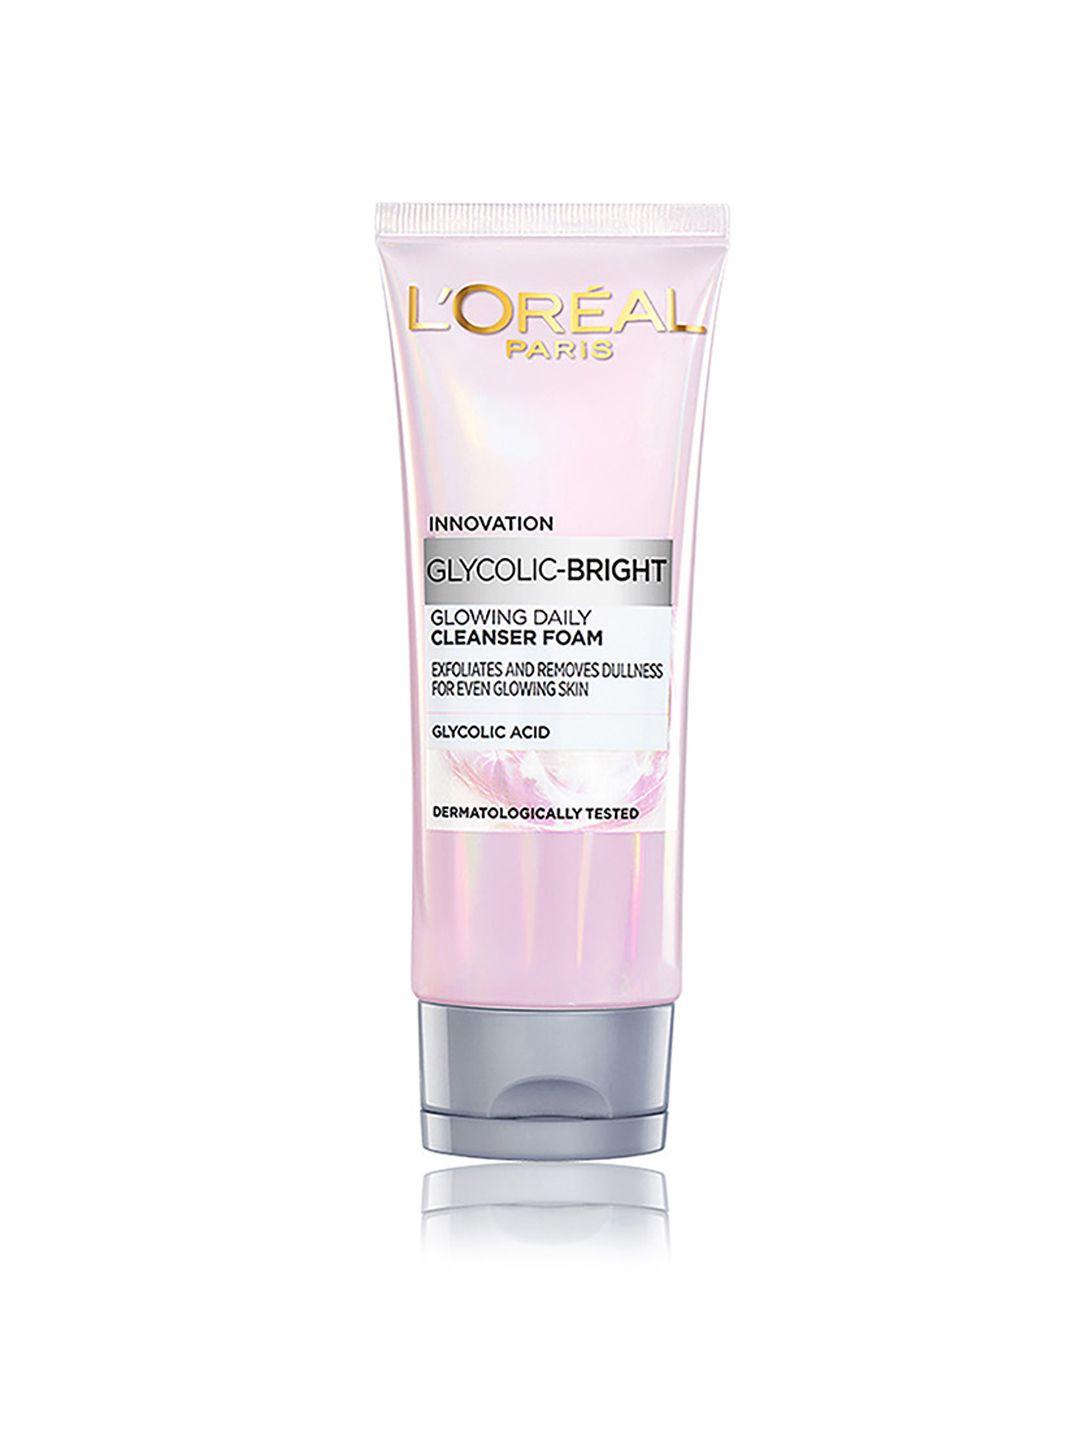 loreal-paris-innovation-glycolic-bright-glowing-daily-cleanser-foam---100ml